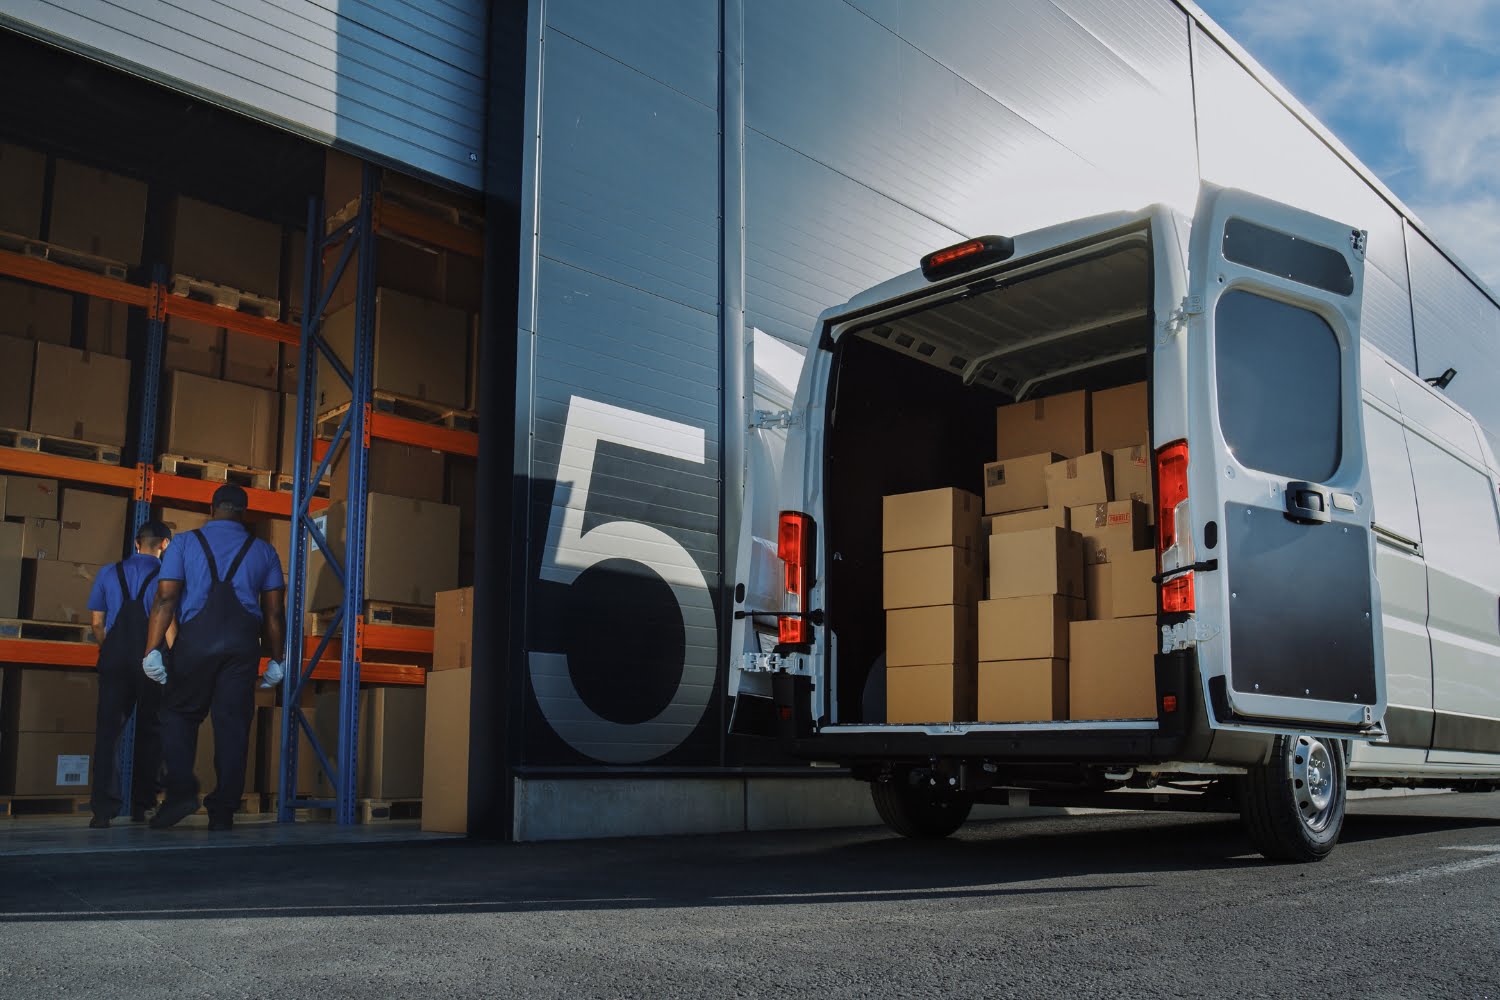 Door to door transport example shown by a cargo transport van stacked with boxes outside a warehouse for home delivery